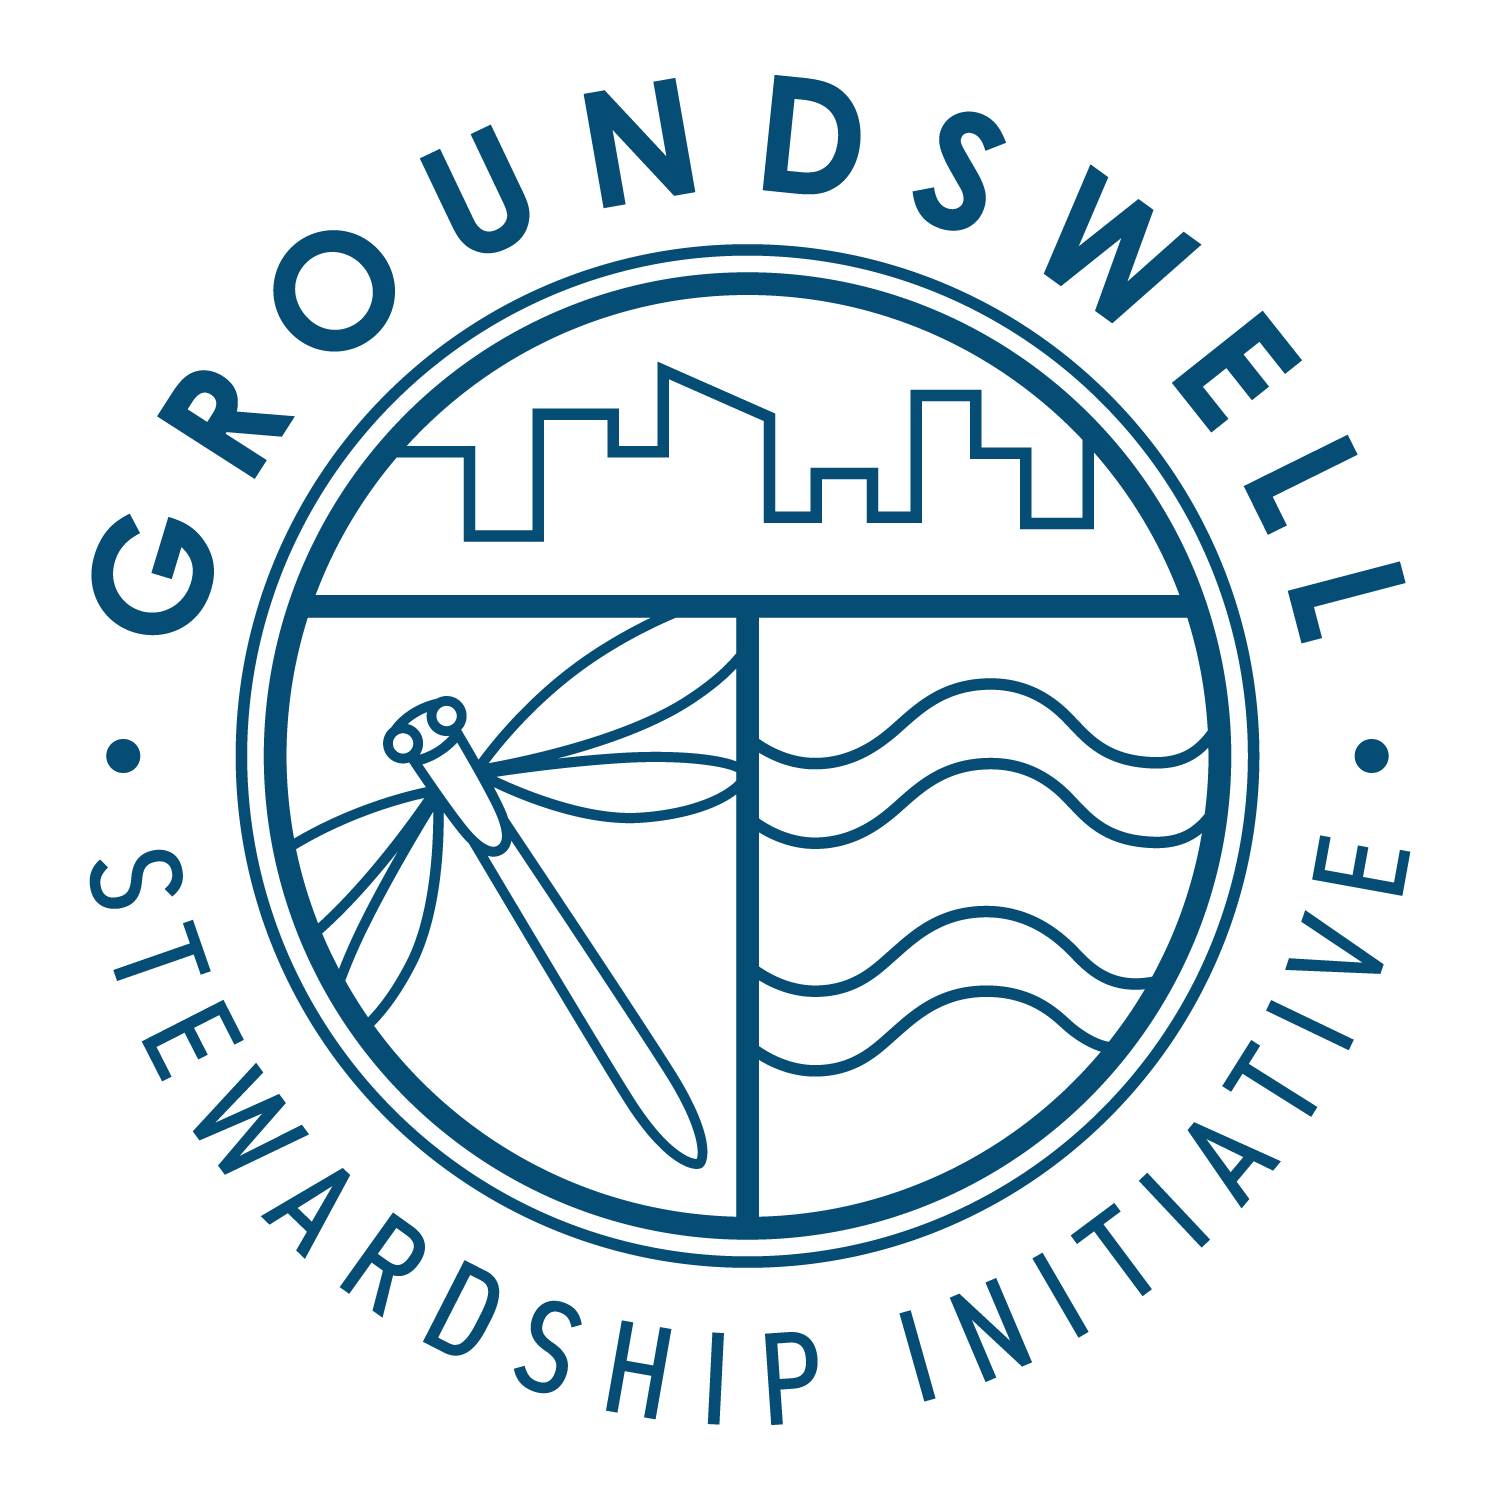 Groundswell Logo, a circle with the words Groundswell Stewardship Initiative around it. Inside the circle is an outline of a city, a dragonfly, and a wave.